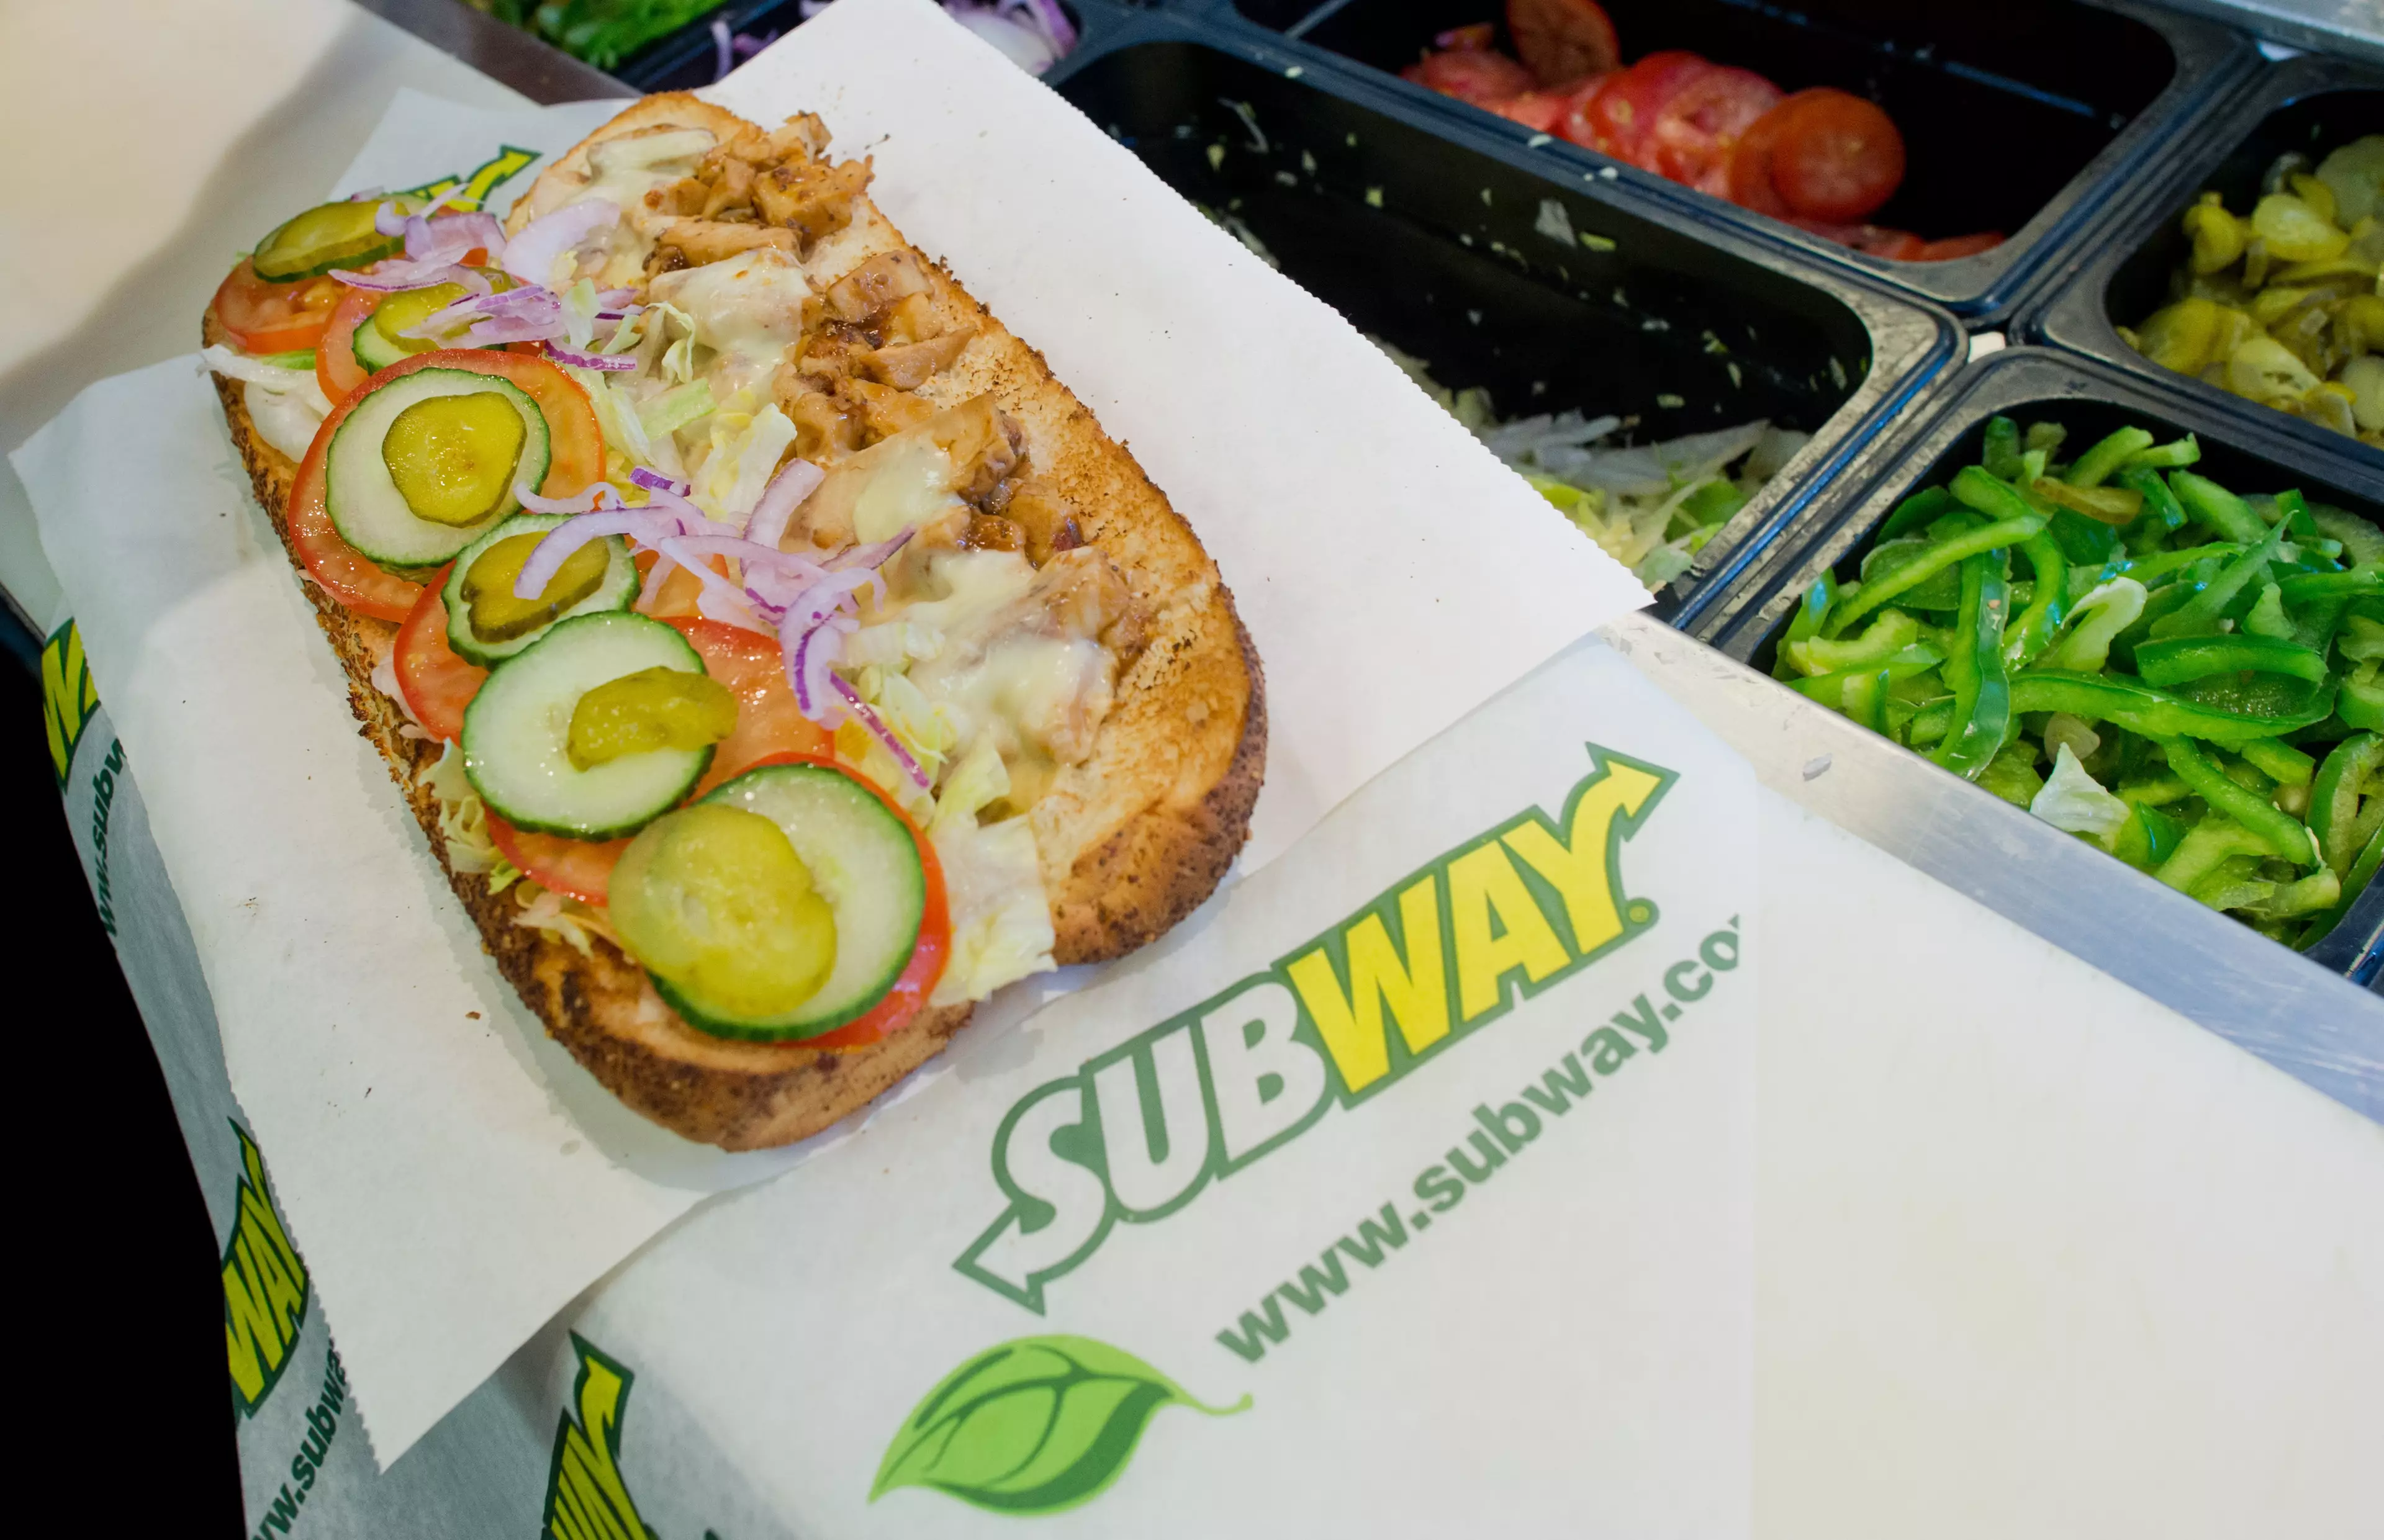 Subway predicts their Mega Meat Sub and the Meatball Marina Sub will be among the popular choices (